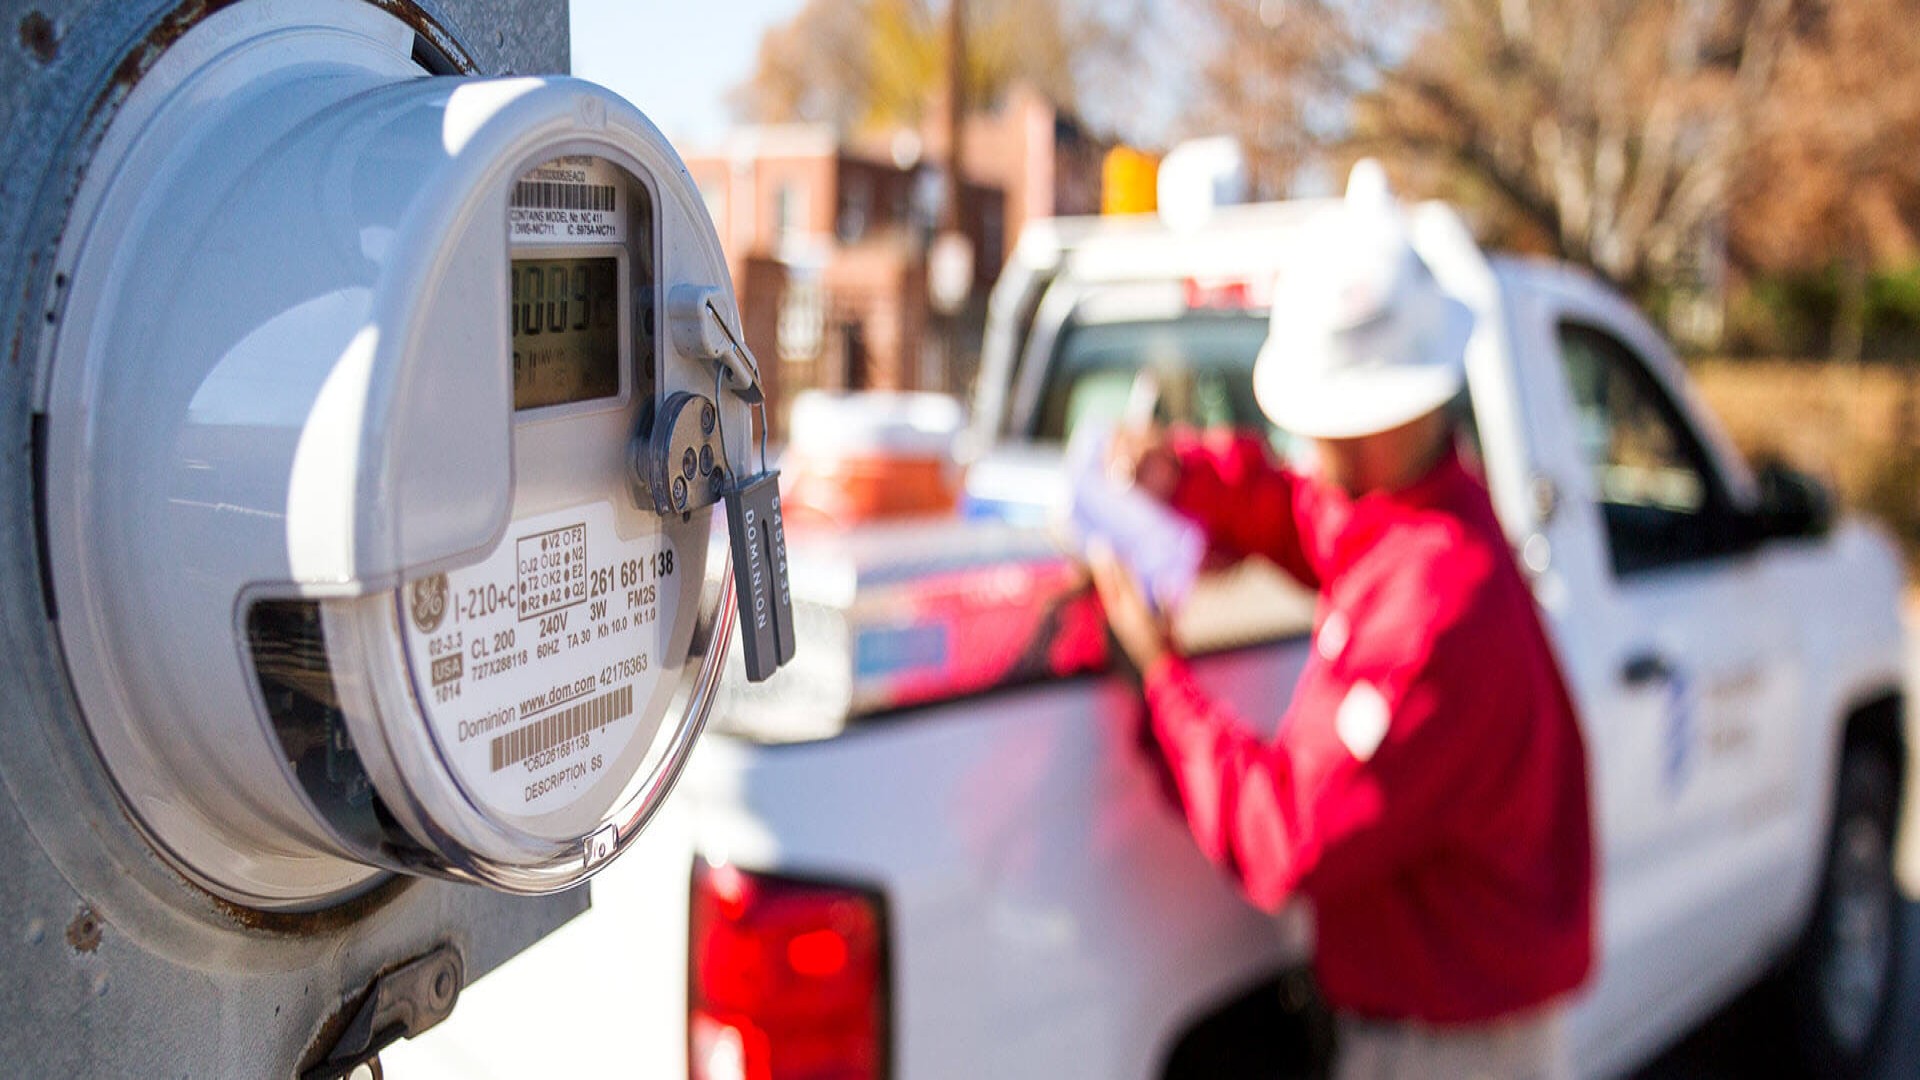 Contractors for Dominion Energy in the area upgrading customers with smart meters